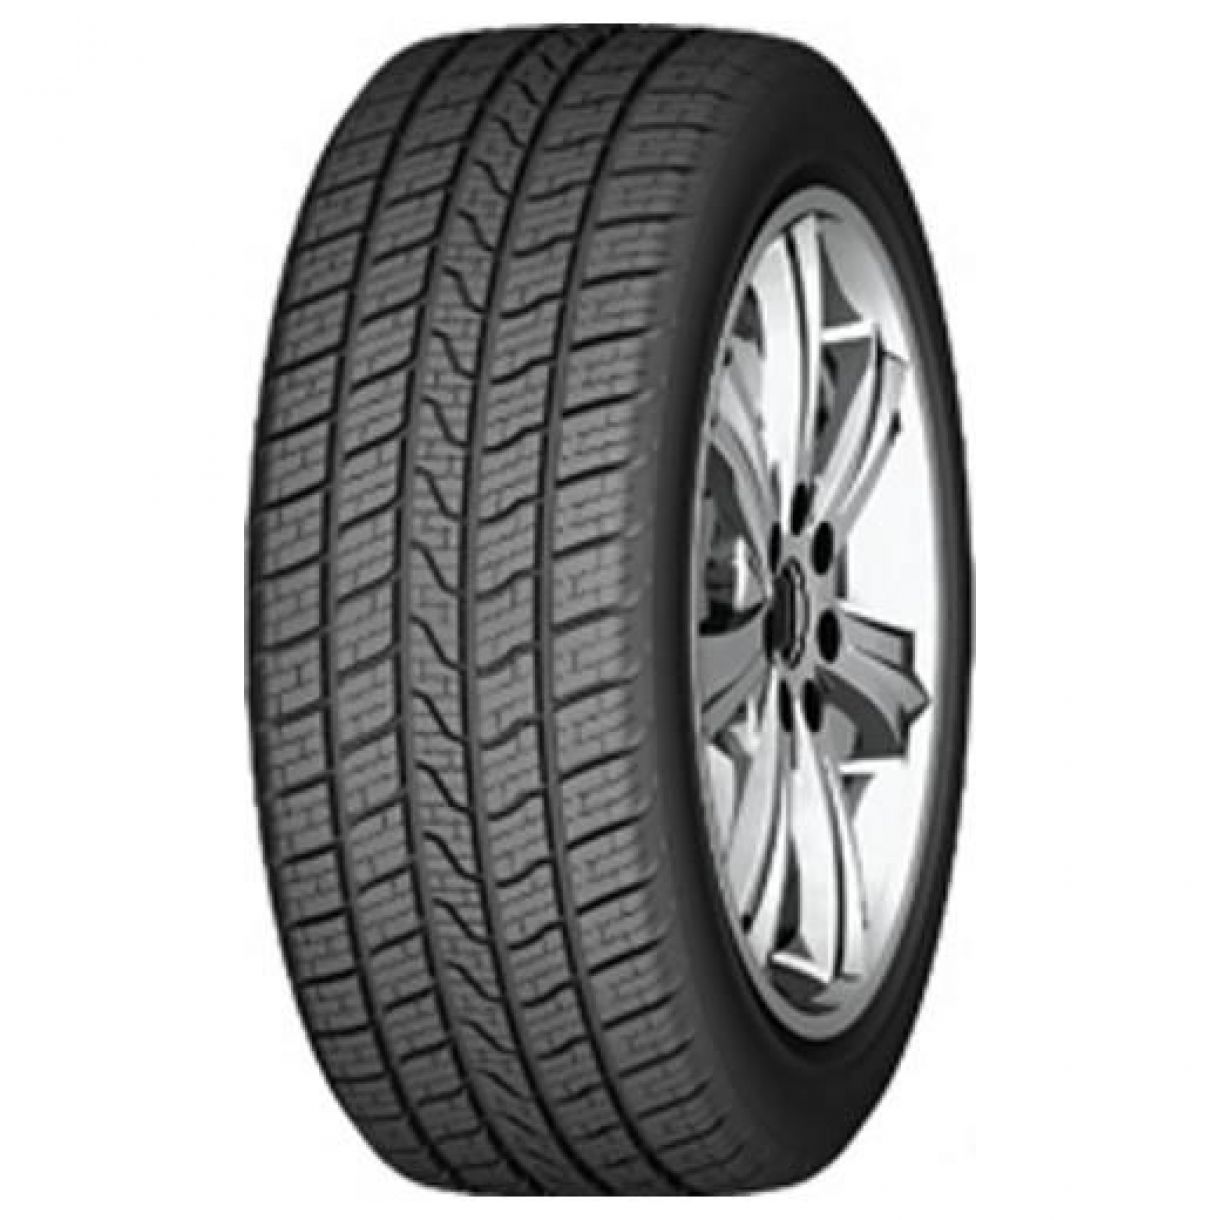 Gomme Nuove Powertrac 195/60 R15 88H POWERMARCH A-S M+S pneumatici nuovi All Season